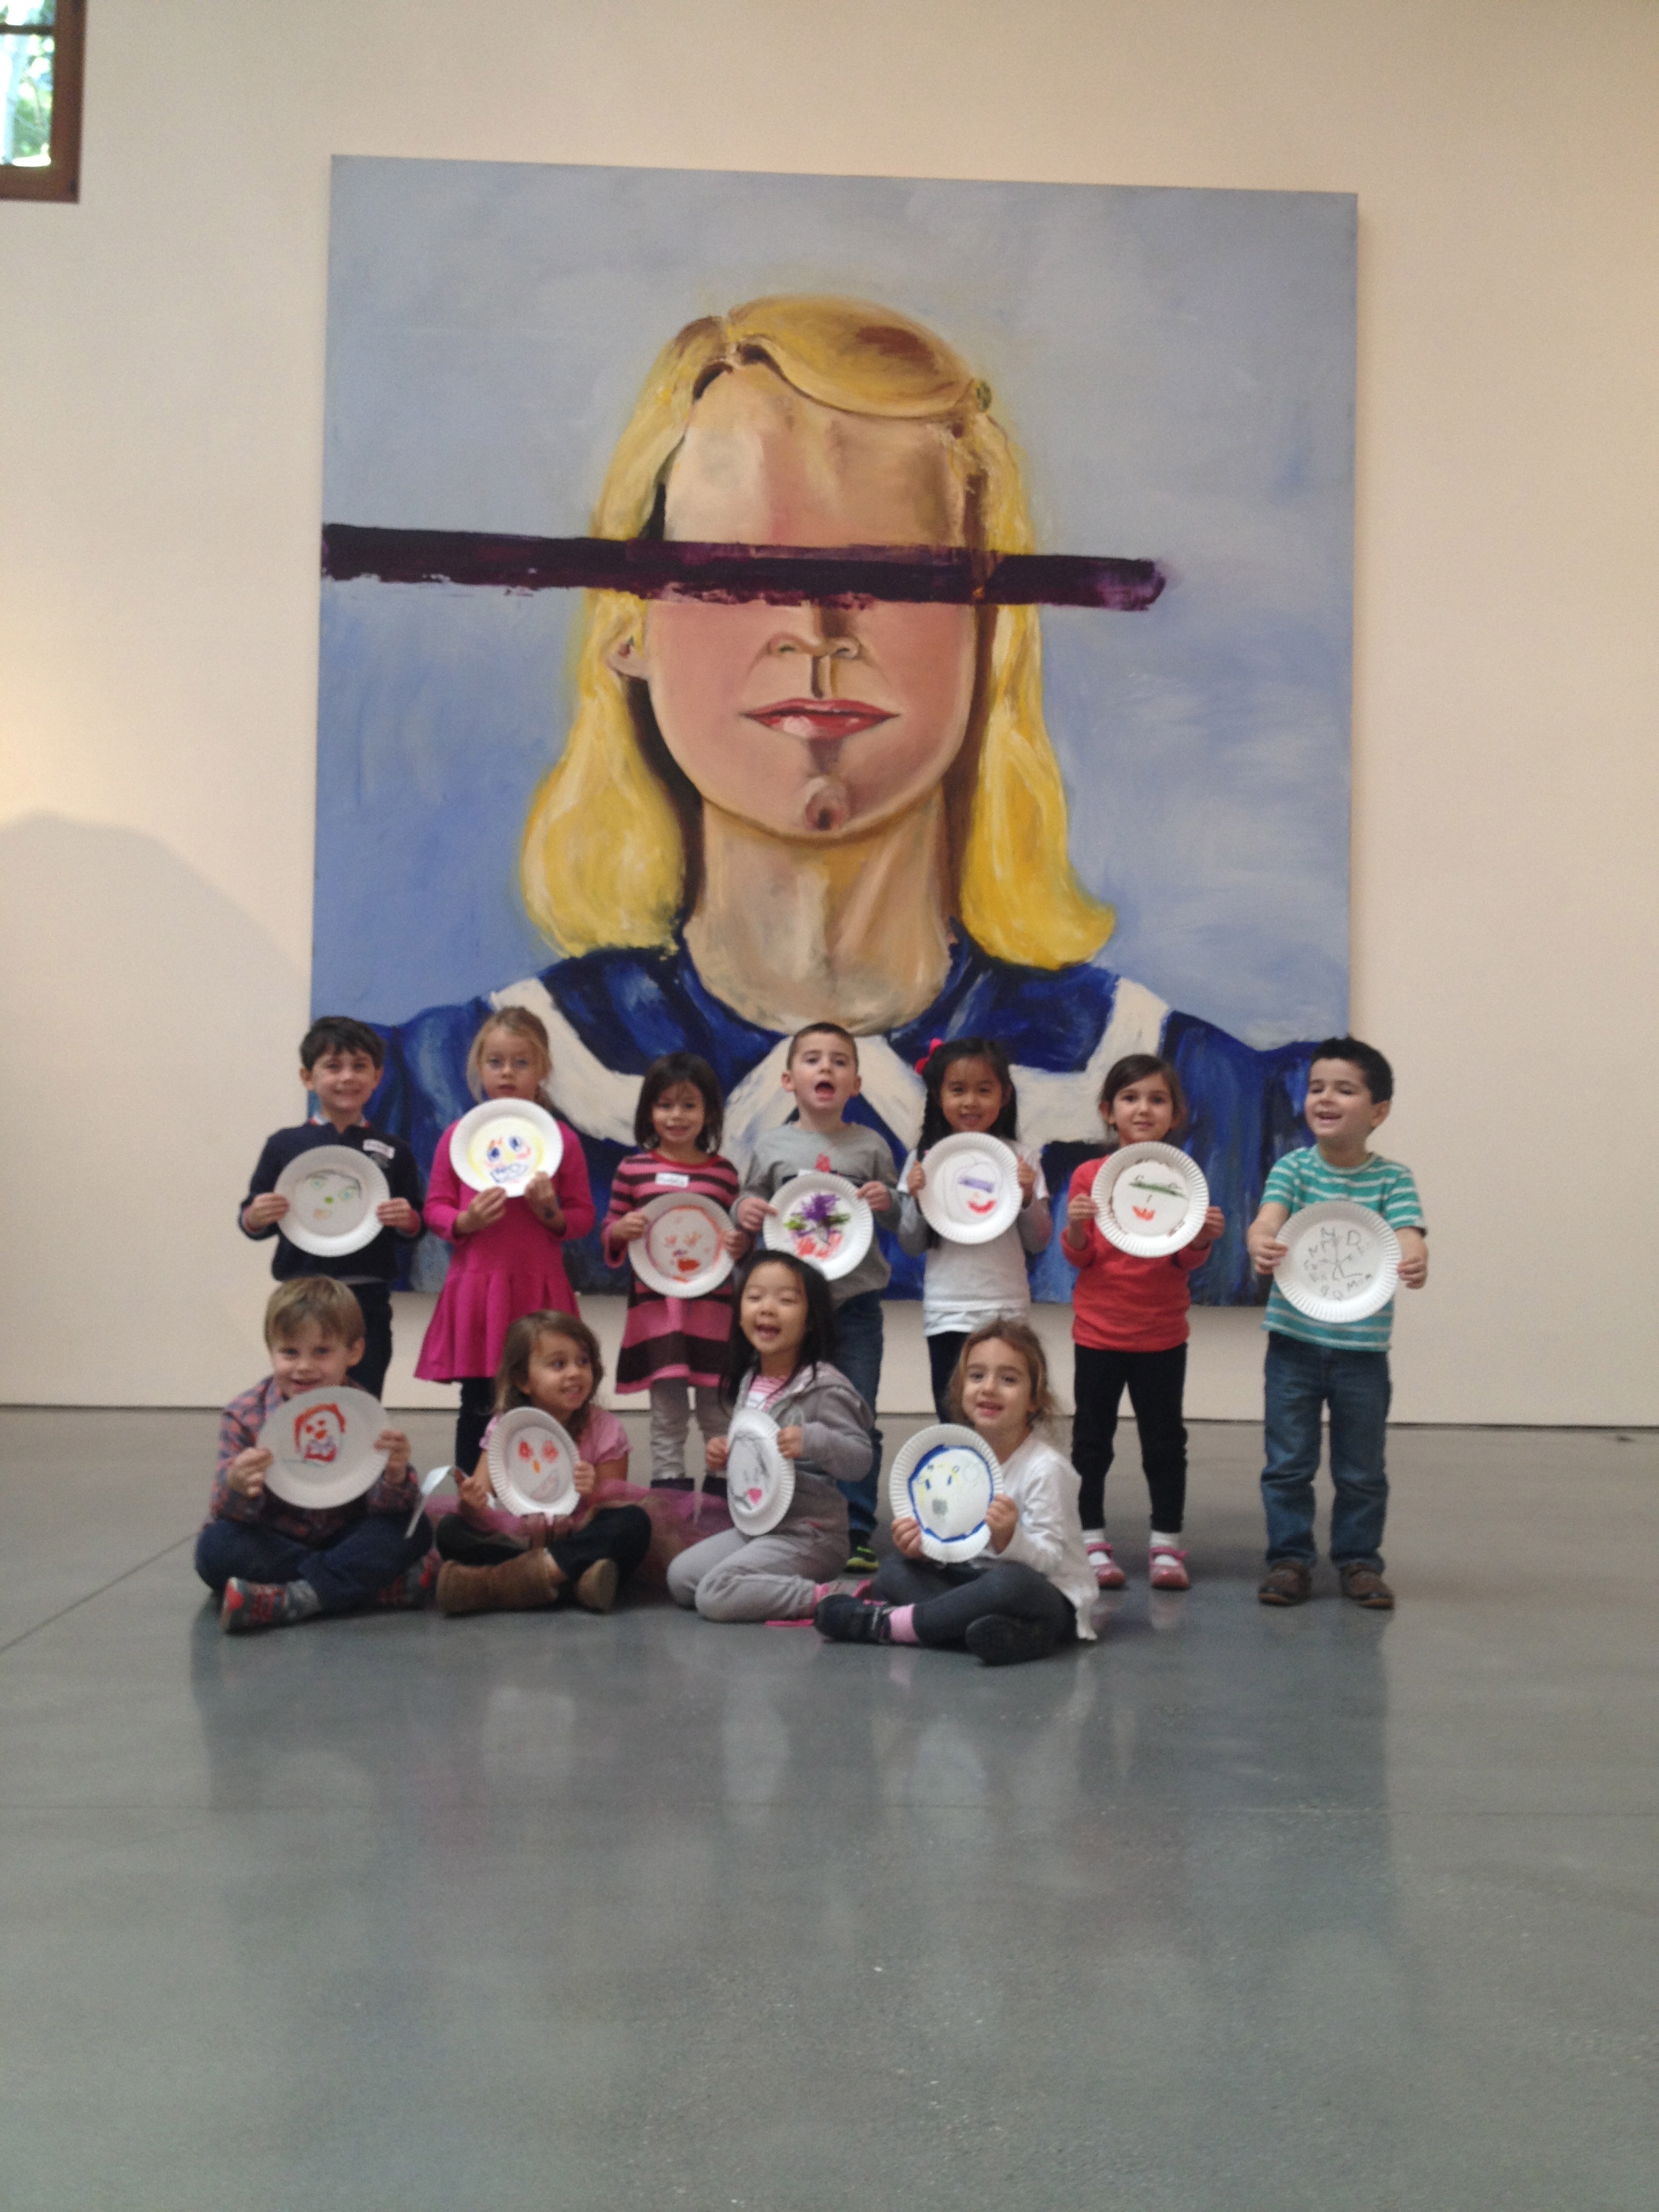 Students visit Julian Schnabel's exhibition and create their own plate paintings.